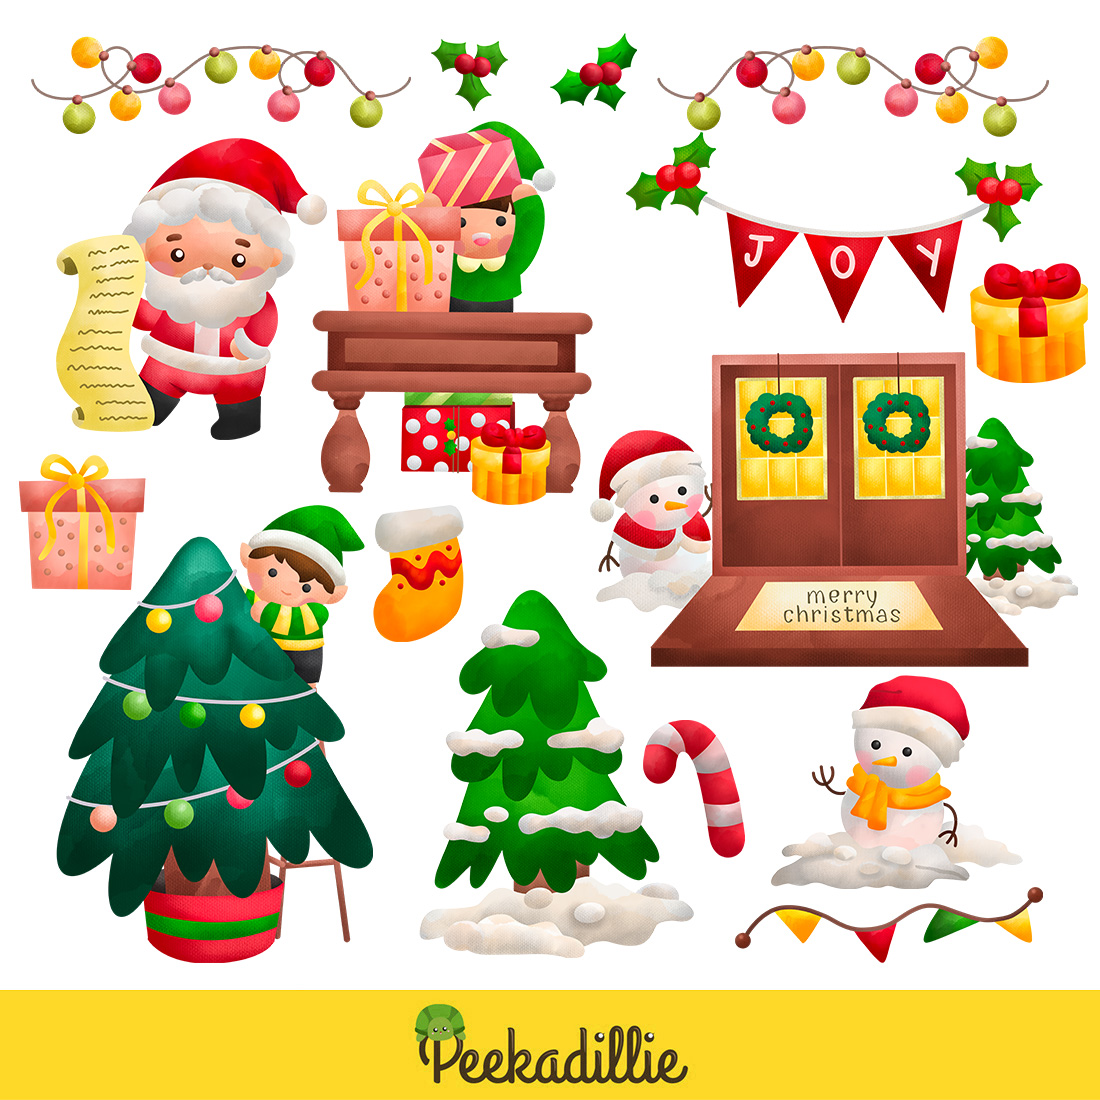 Watercolour Decorated for Christmas Holiday Celebration Ornament Background Character Snowman Santa Claus Elf Tree Cartoon Illustration Vector Clipart Sticker preview image.